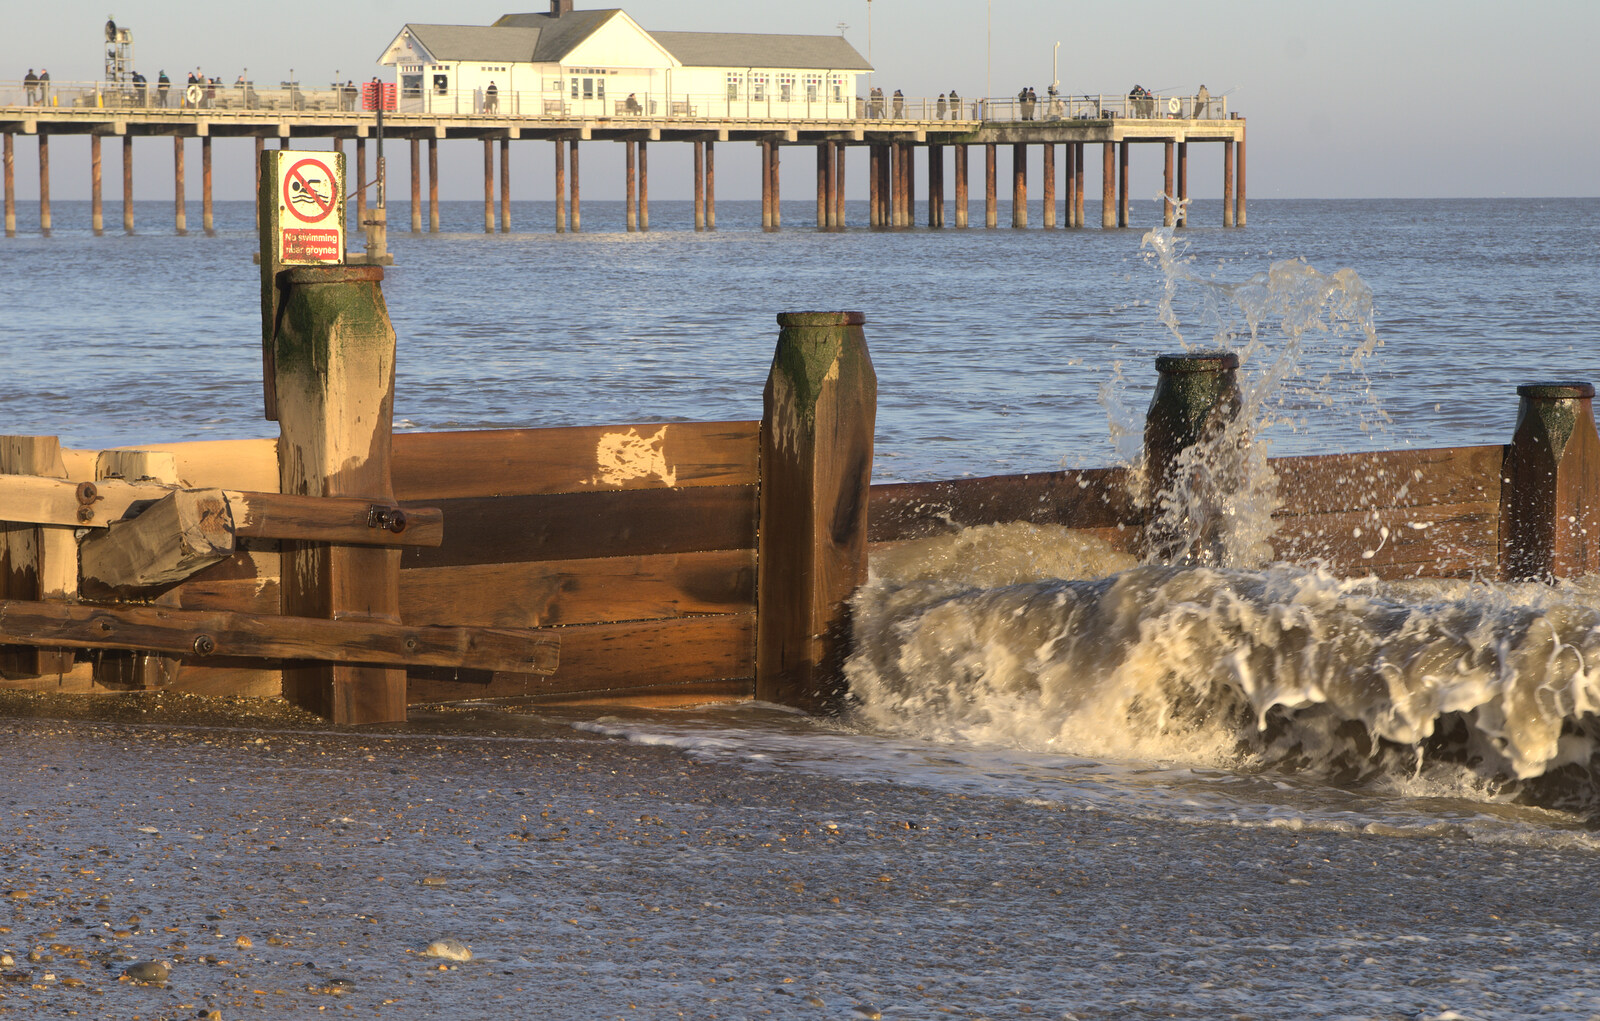 Waves crash on the groynes from Sunset on the Beach, Southwold, Suffolk - 30th December 2014